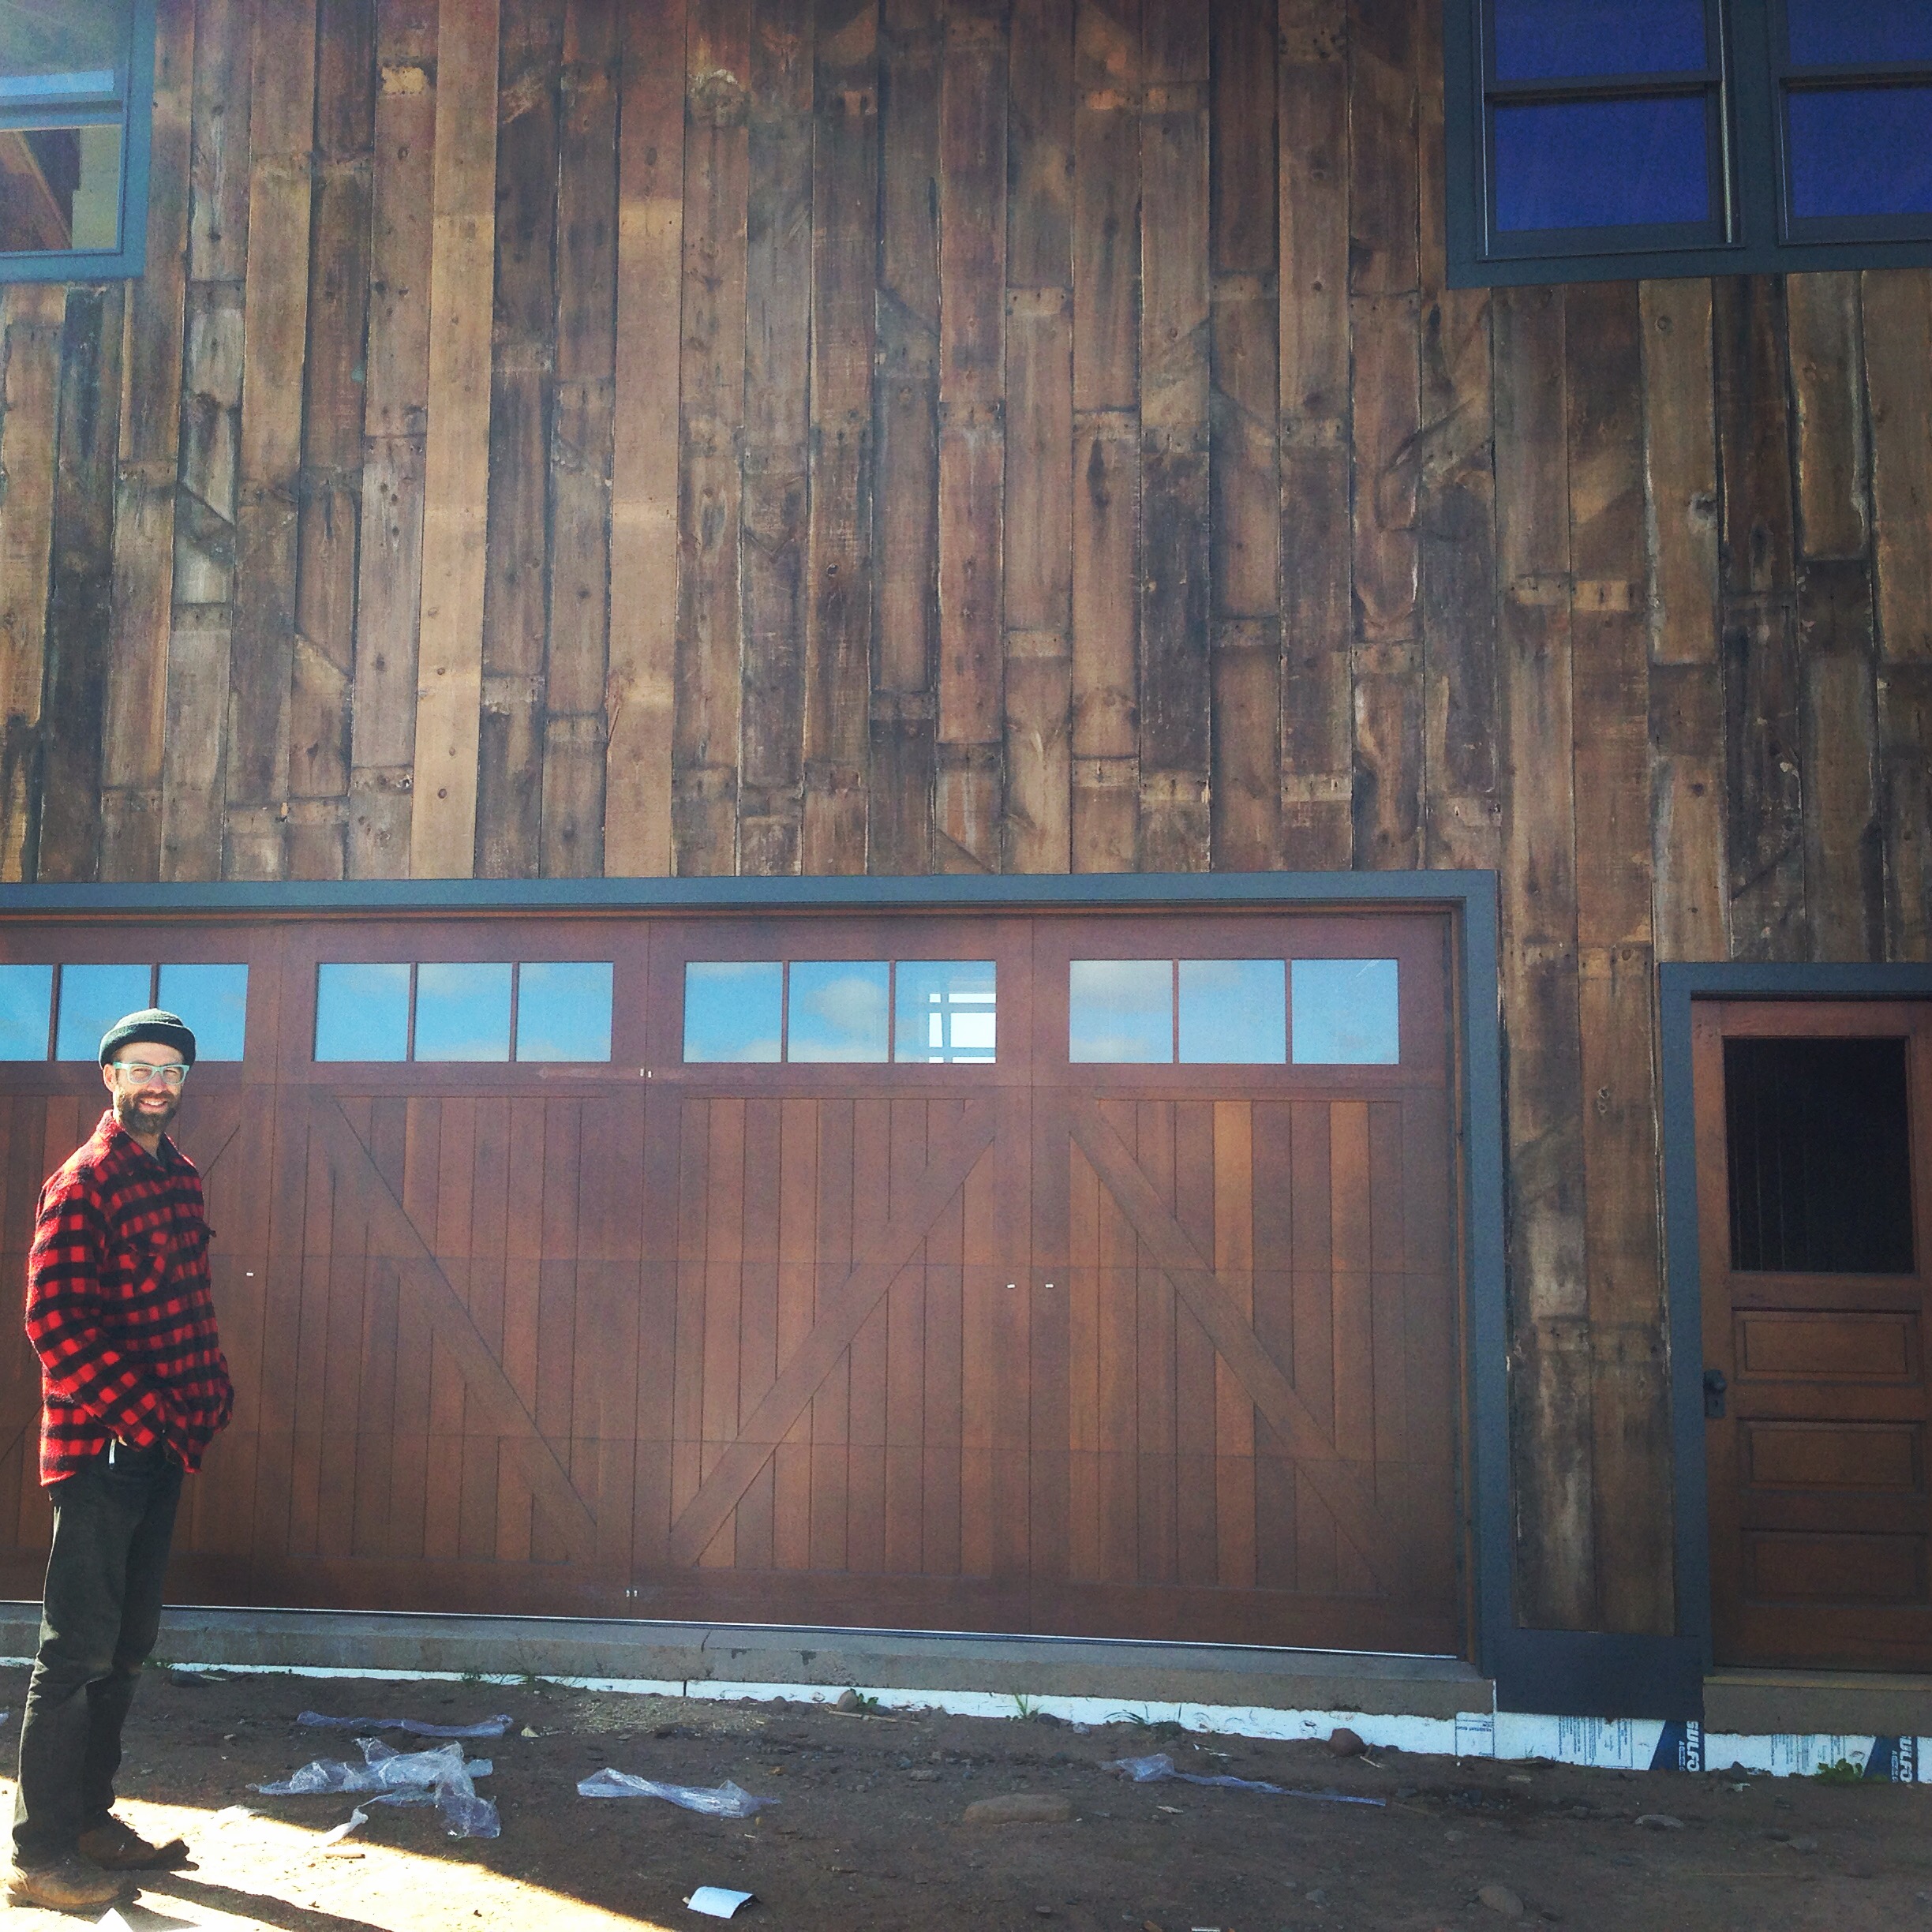 Jason found recycled barn wood for the siding